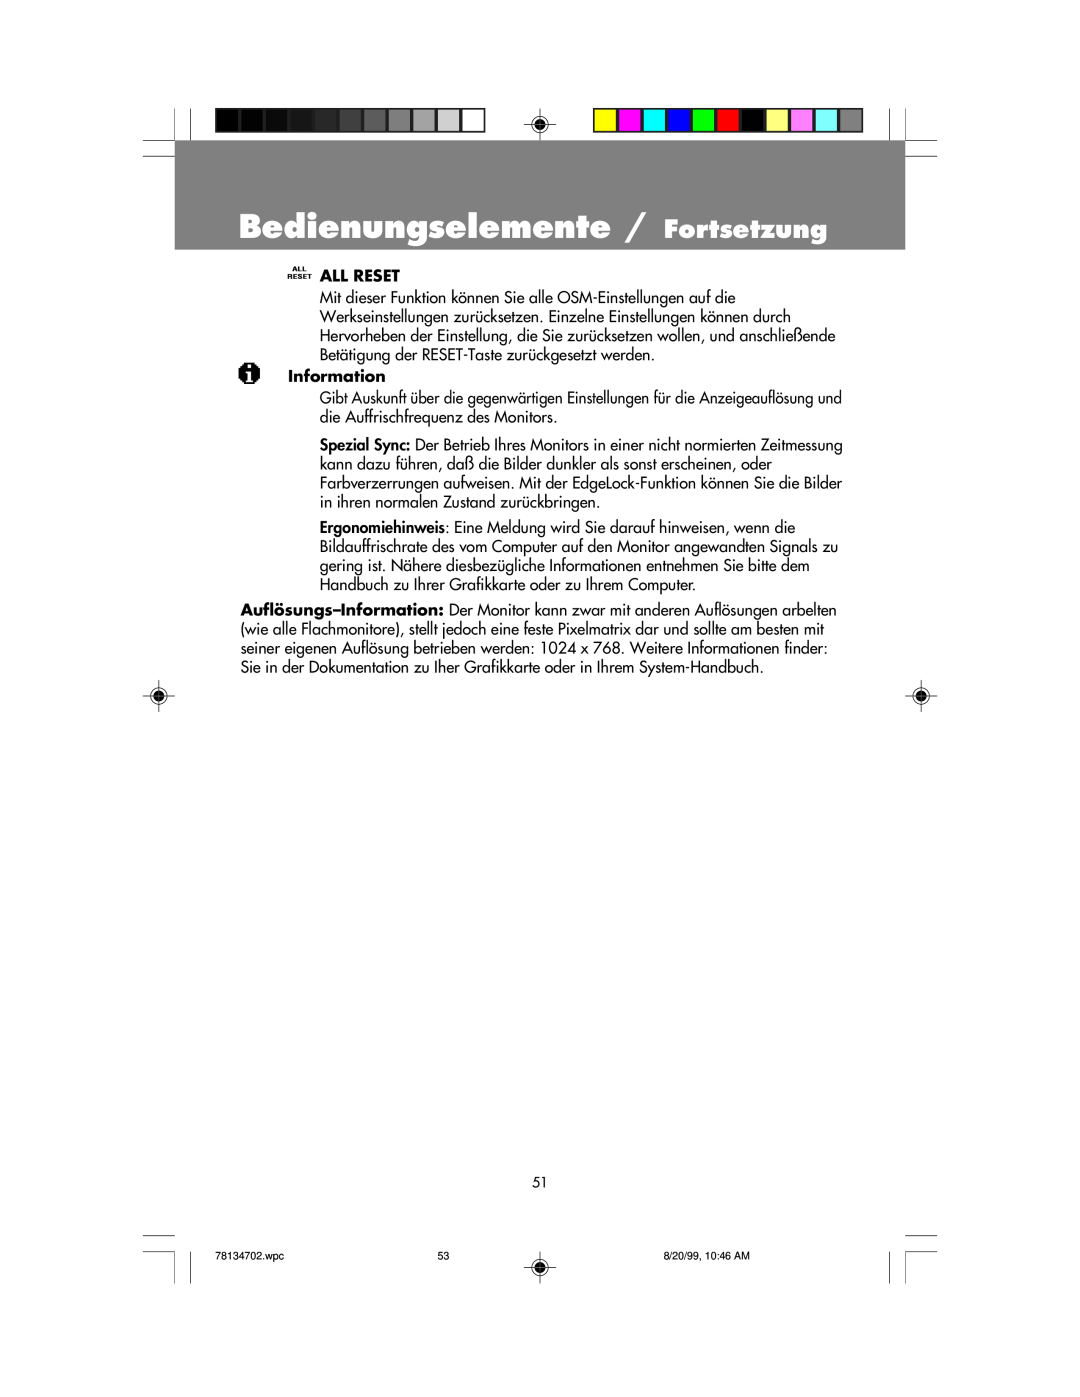 NEC LCD1510+ user manual Bedienungselemente / Fortsetzung, All Reset, Information 